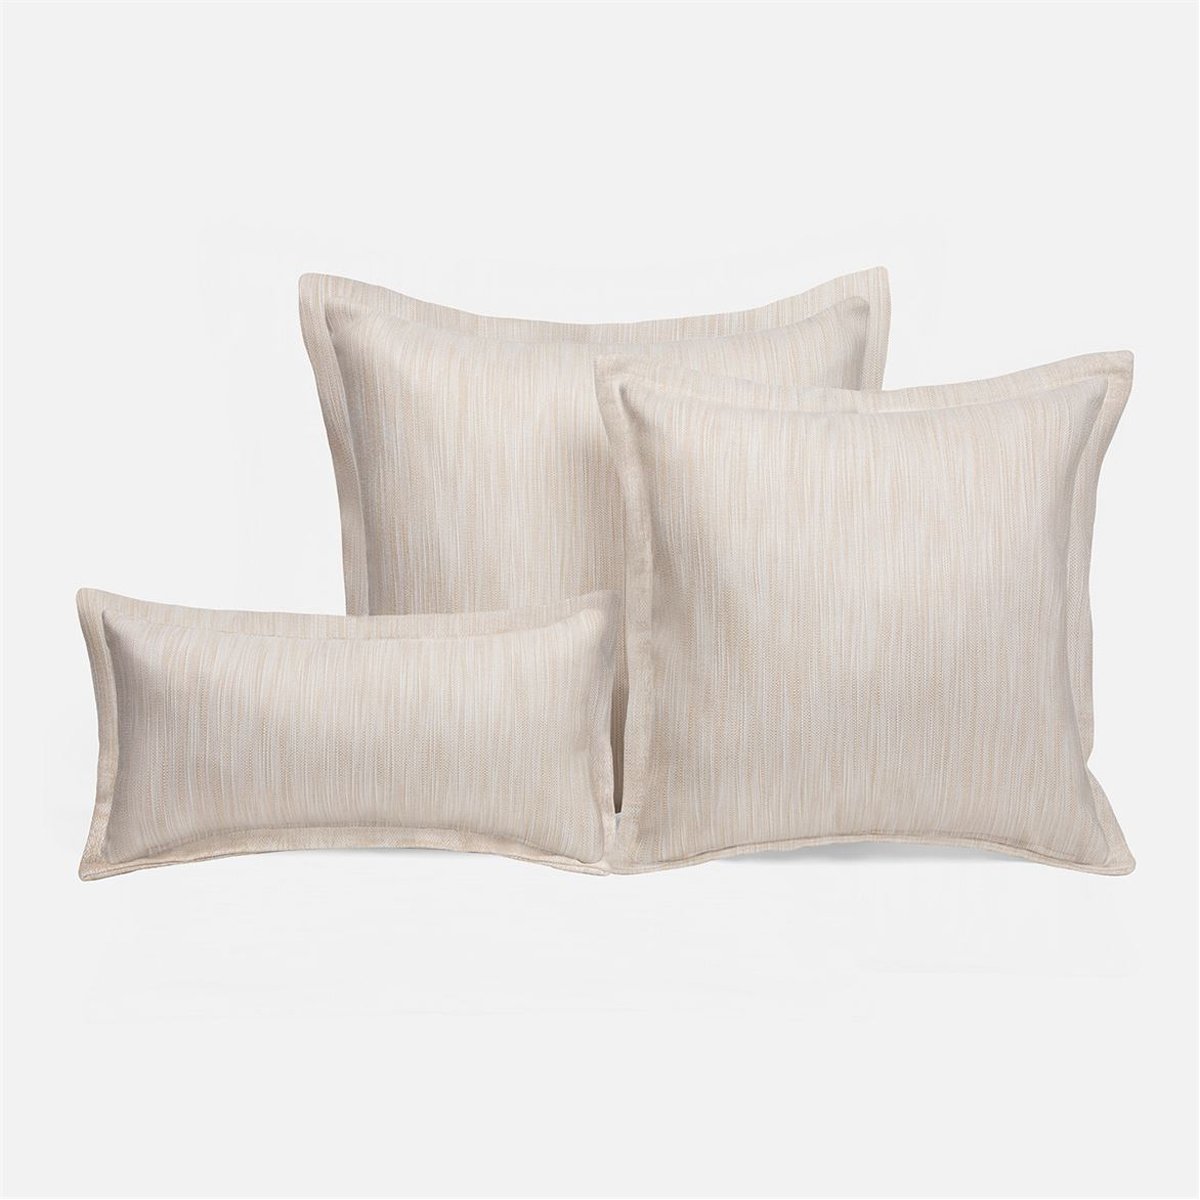 Made Goods Elsie High-Performance Square Outdoor Pillows, Set of 2